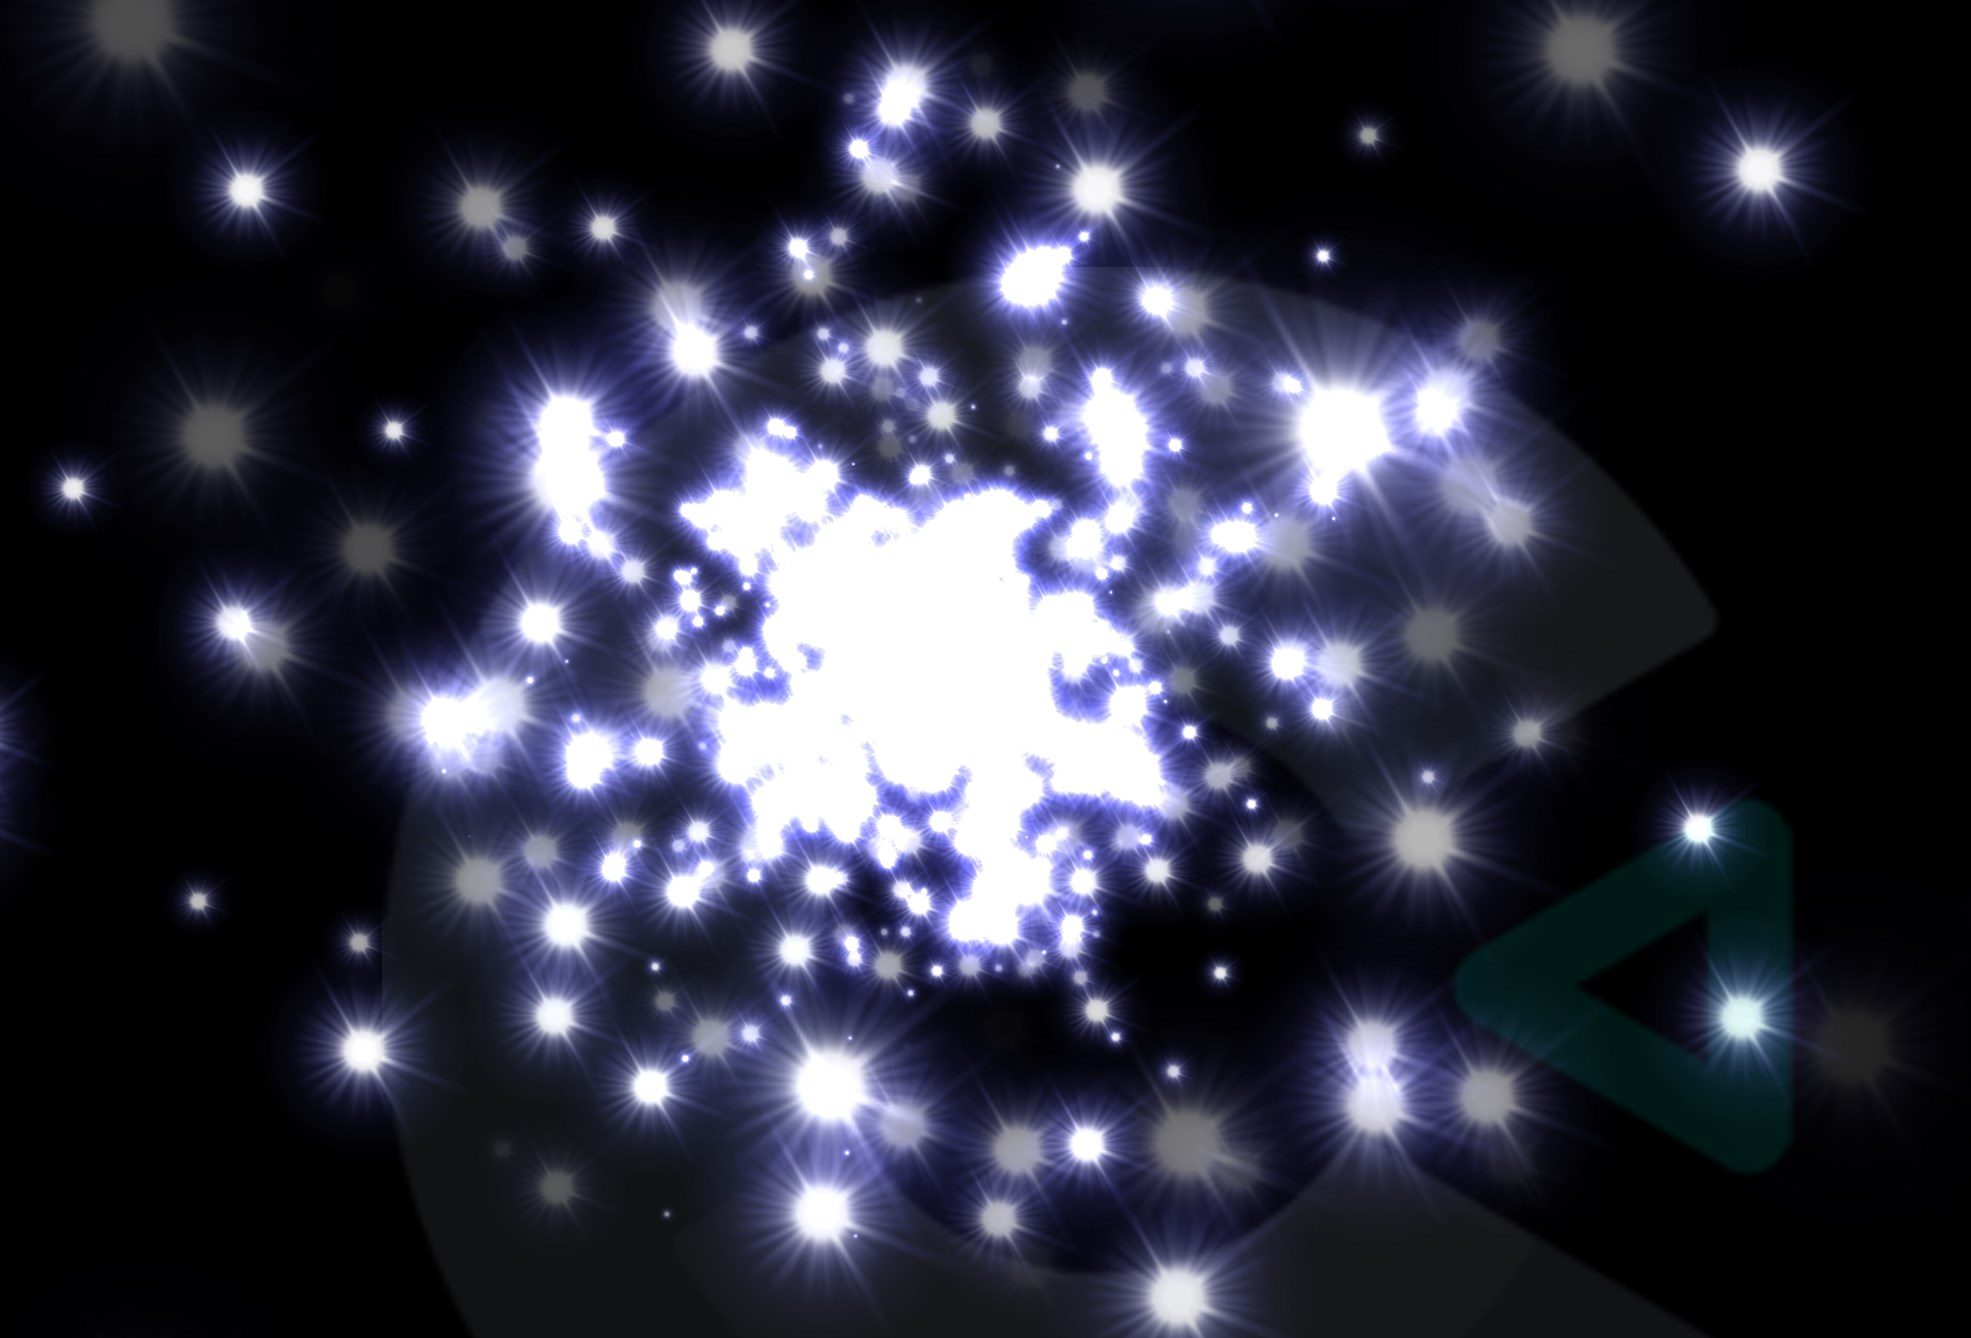 An example of an effect produced by the Particles object